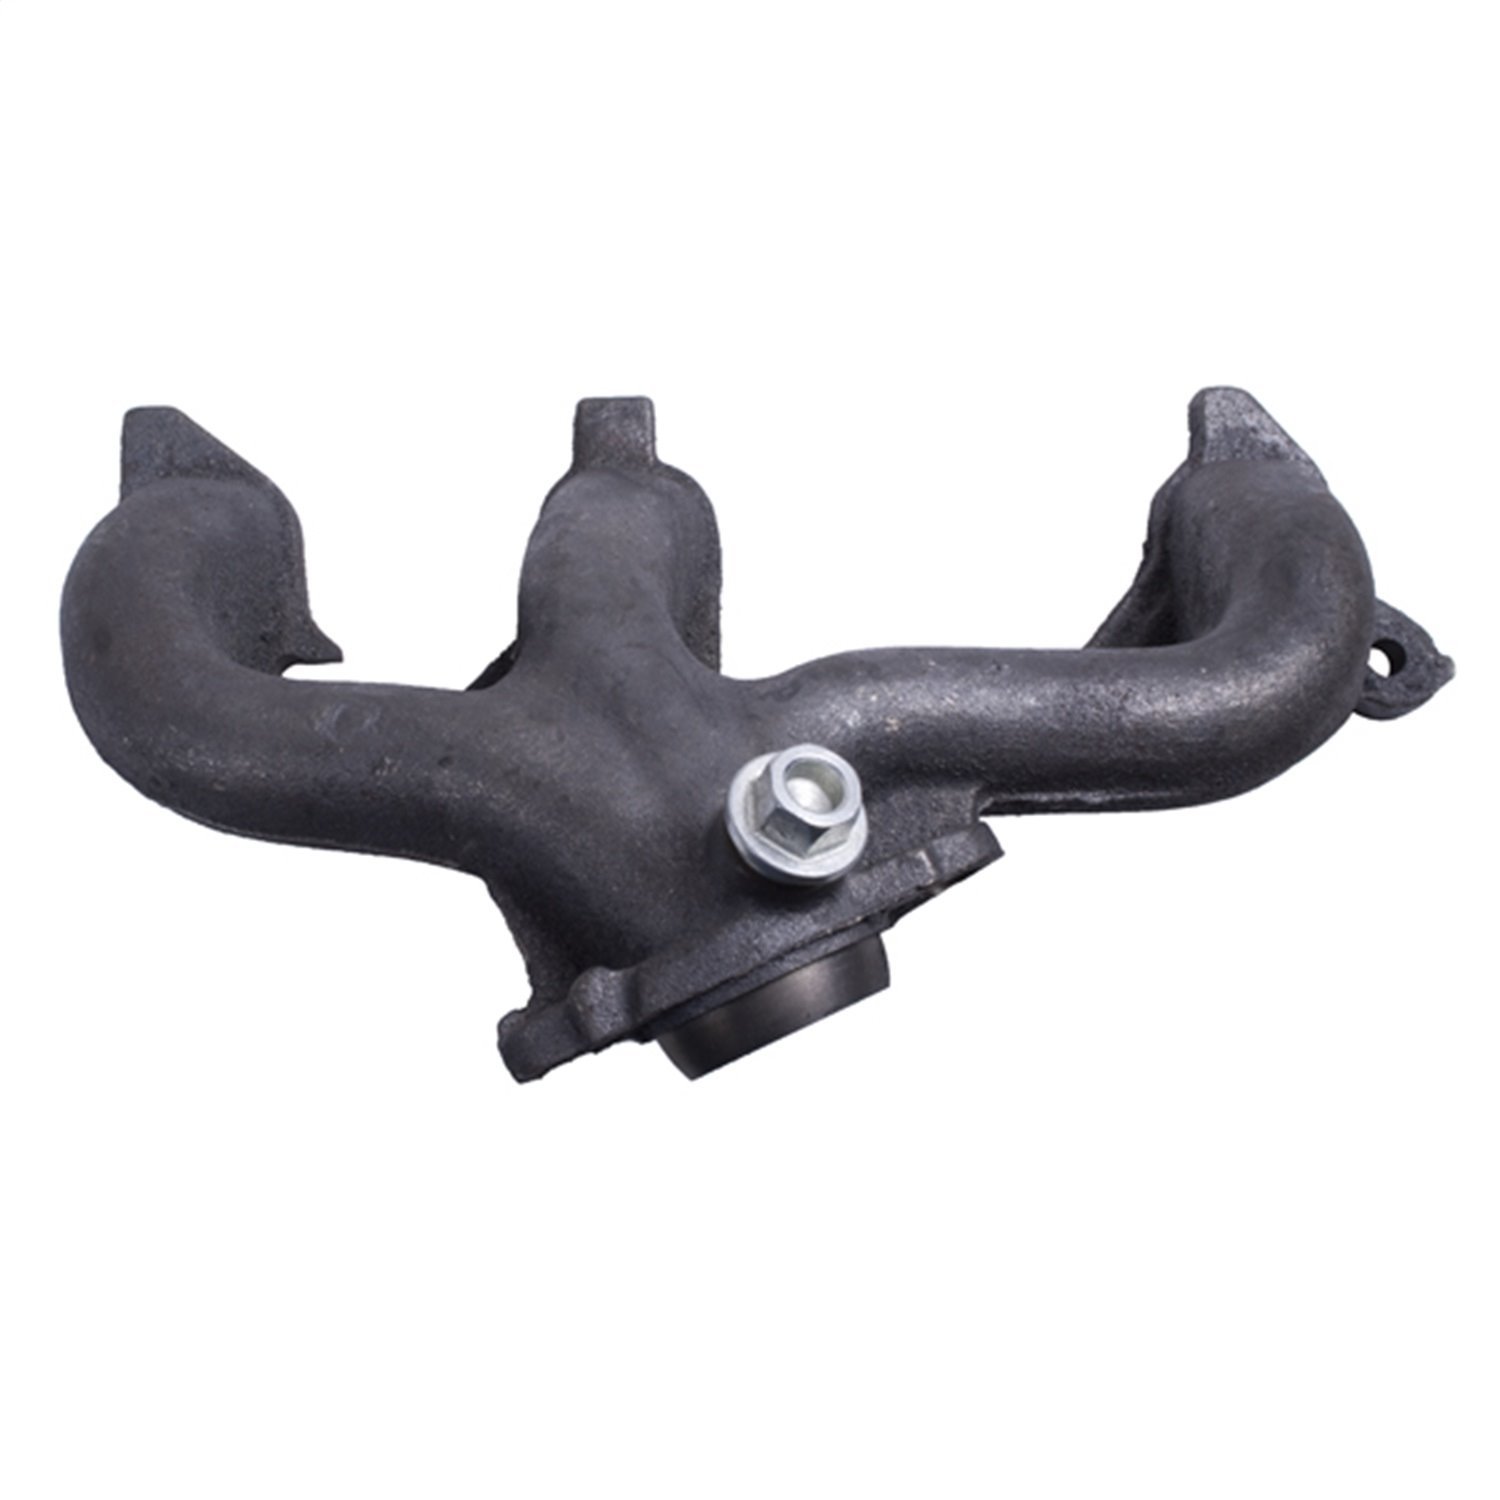 This exhaust manifold rear section from Omix-ADA fits 00-06 Jeep Wrangler 00-01 Cherokees and 99-01